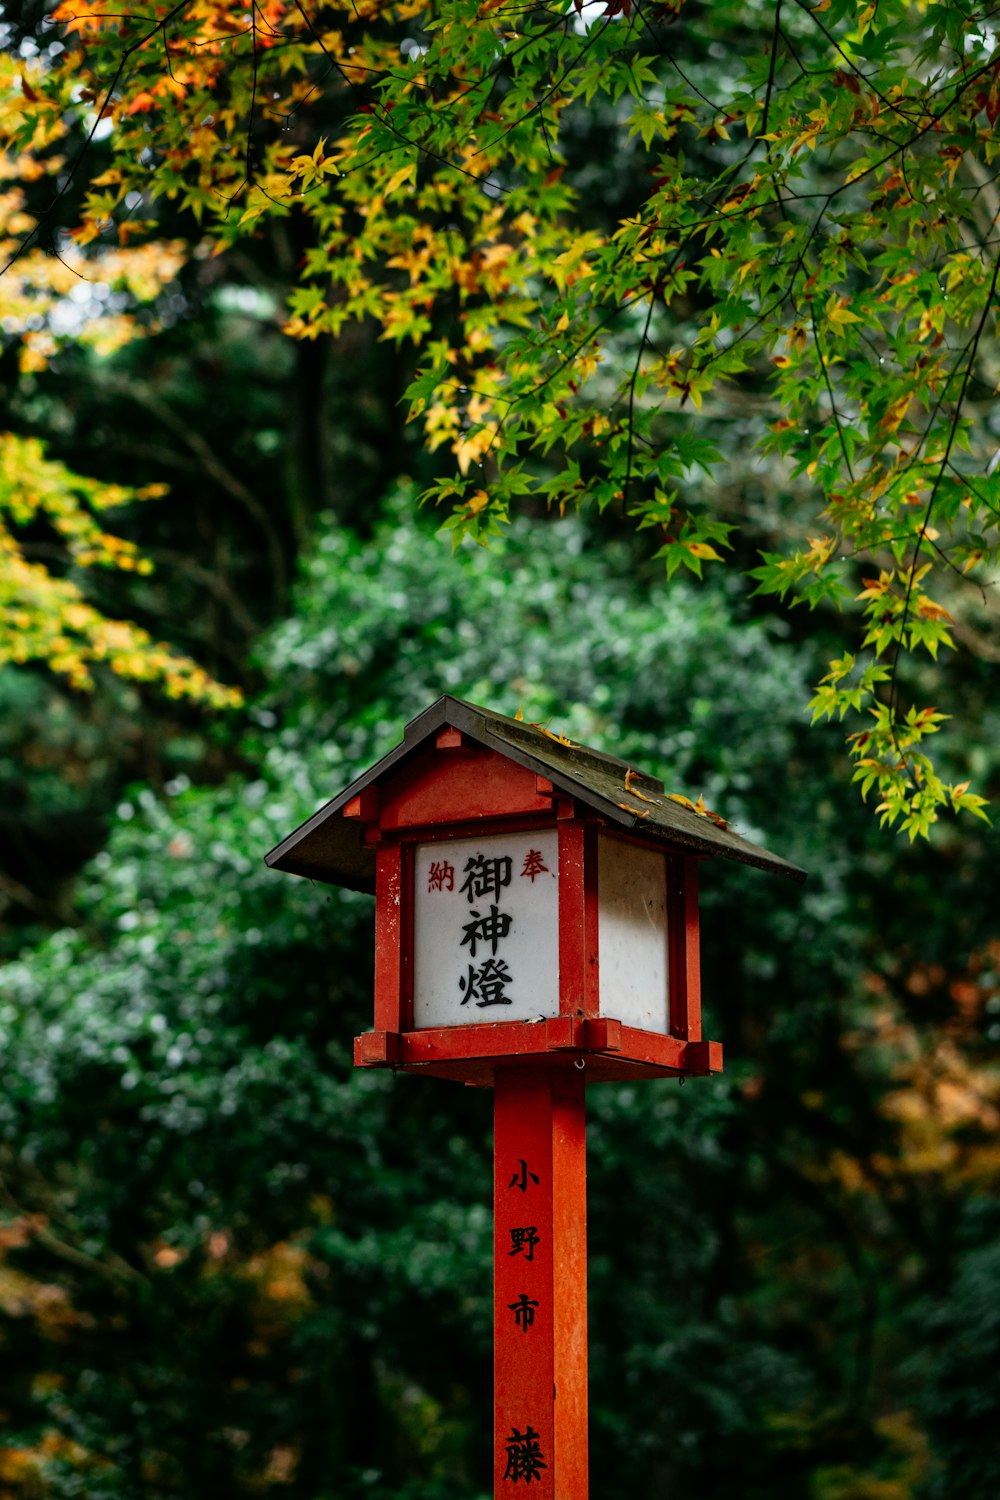 a red and white bird house with asian writing on it